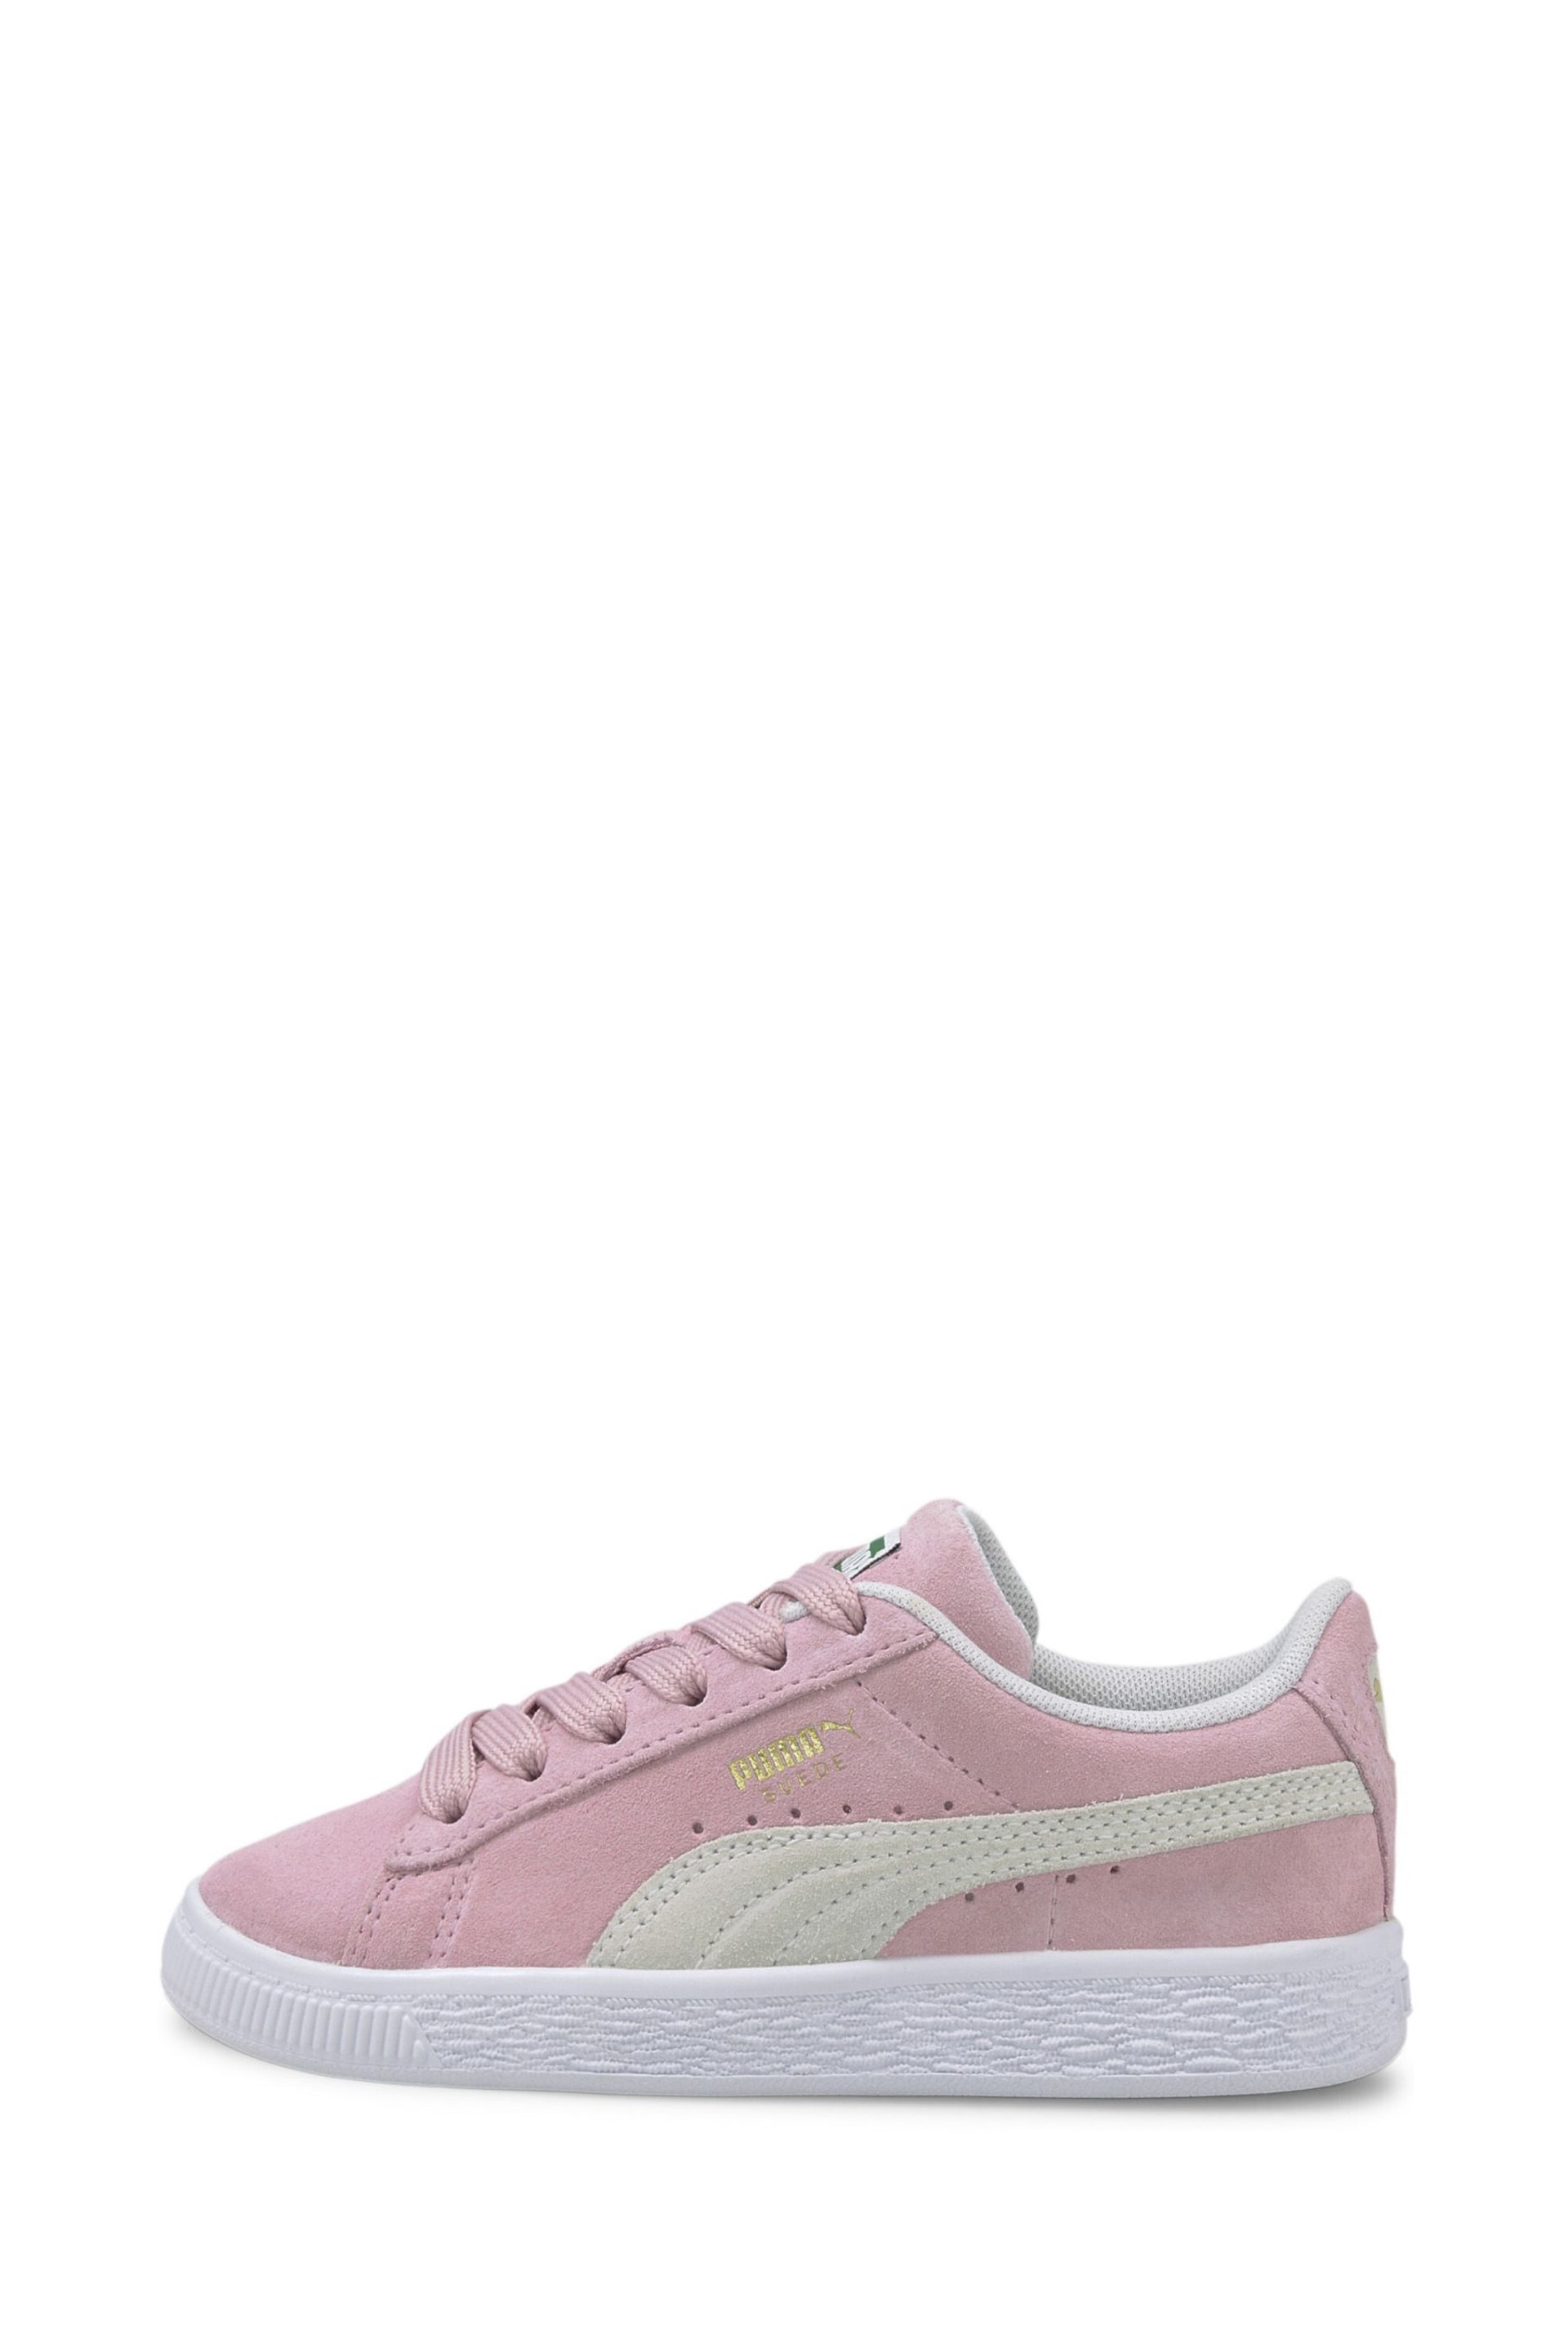 Puma Pink Suede Classic XXI Kids Trainers - Image 3 of 6